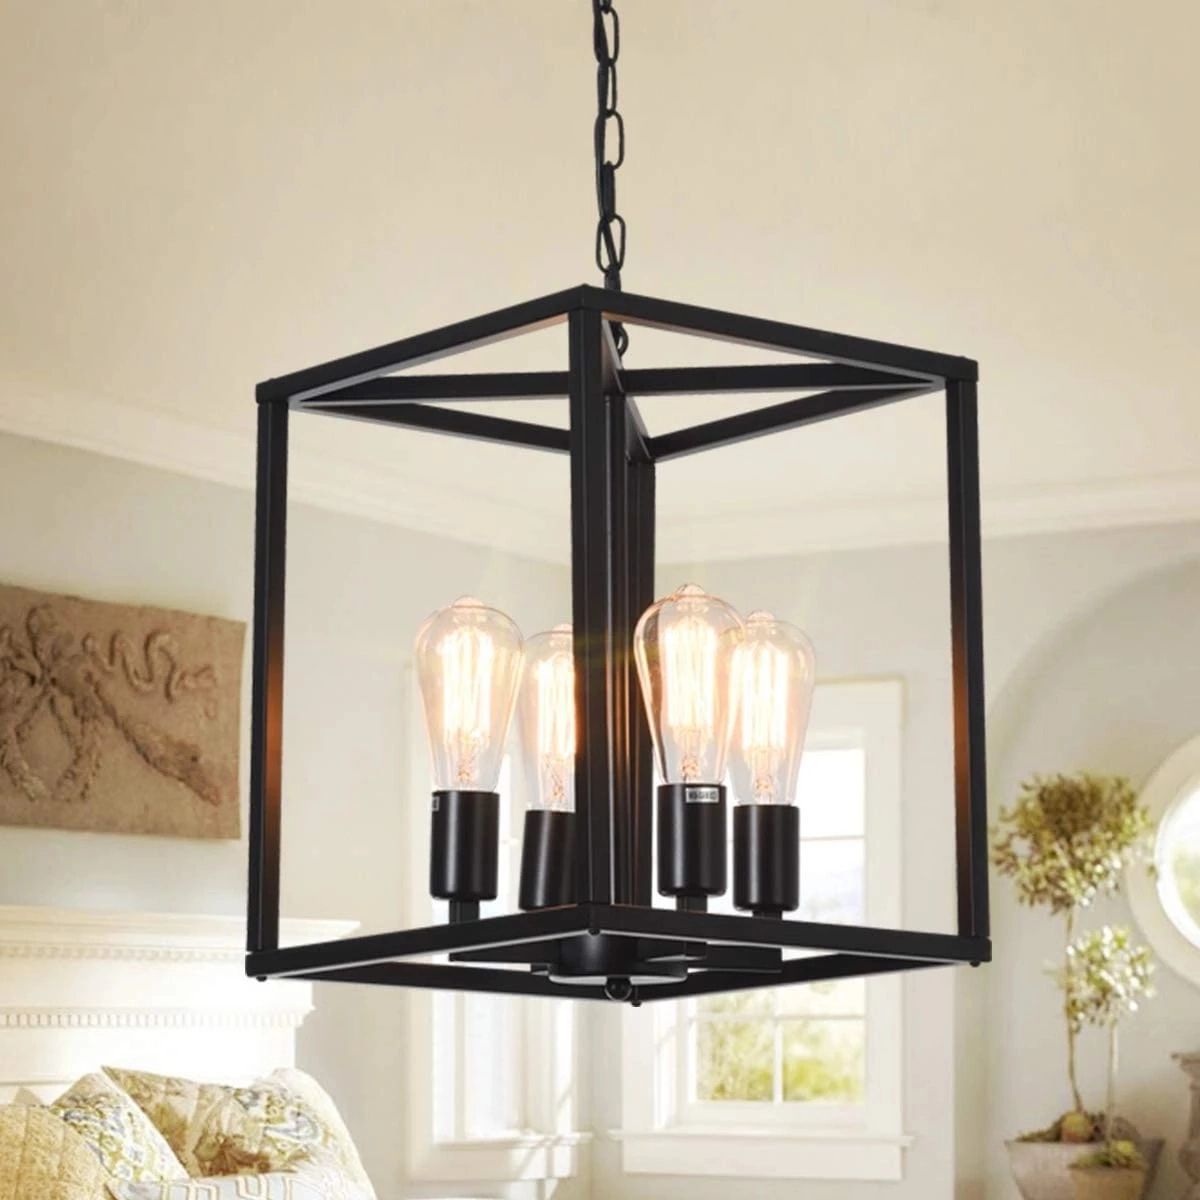 Industrial Metal Lantern Chandeliers 4 Light Adjustable Height Farmhouse  Ceiling Rustic Gold Kitchen Hanging Lighting Fixture – Pendant Lights –  Aliexpress Pertaining To Trendy Adjustable Lantern Chandeliers (View 3 of 10)